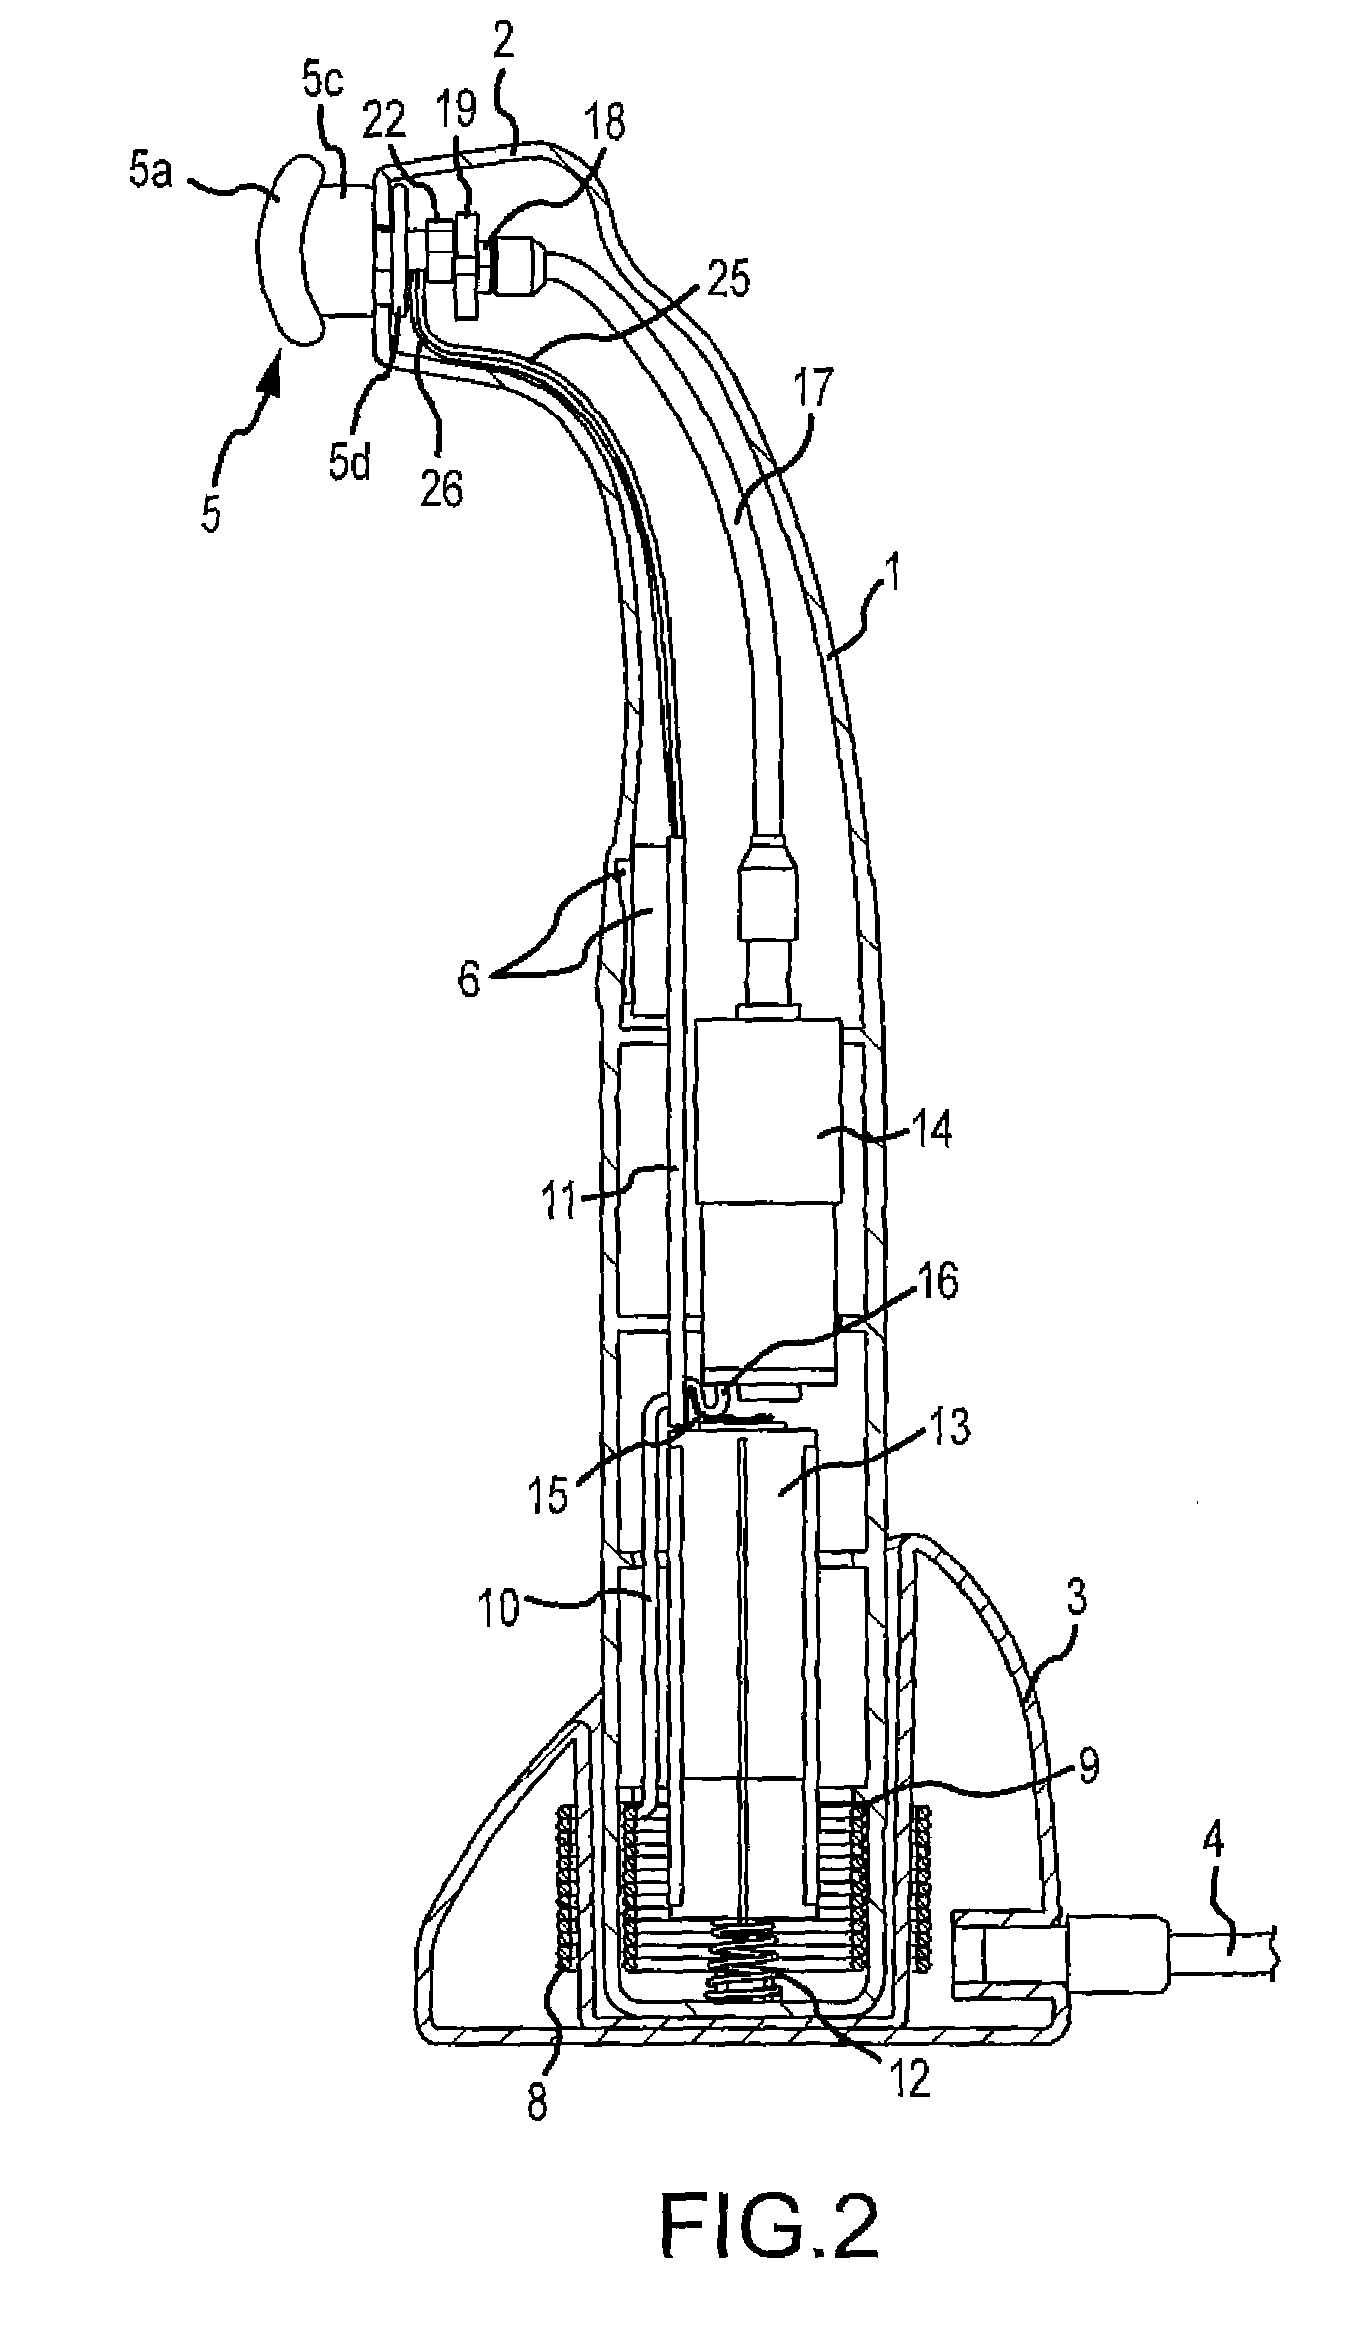 Device and method for stimulating the meibomian glands of the eyelid